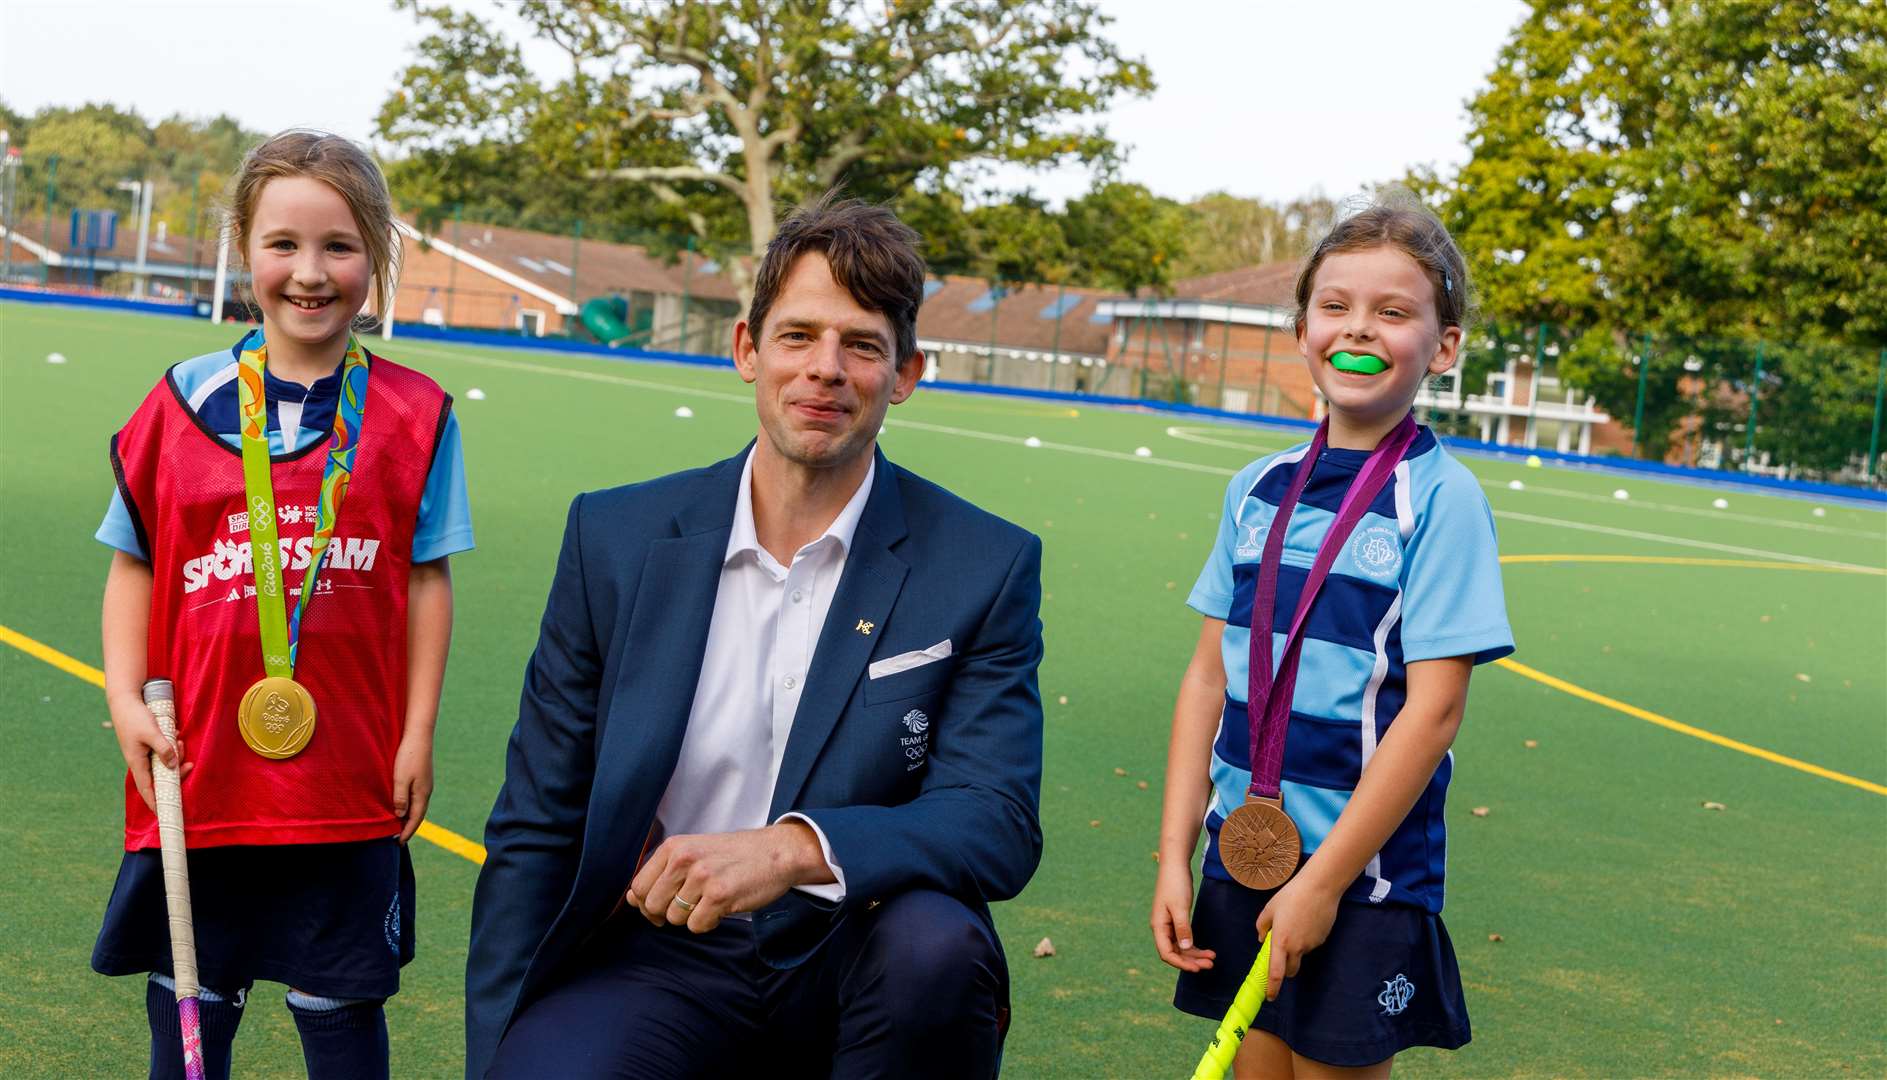 Tom Ransley allowed these Year 3 hockey players to experience what it was like to wear an Olympic medal